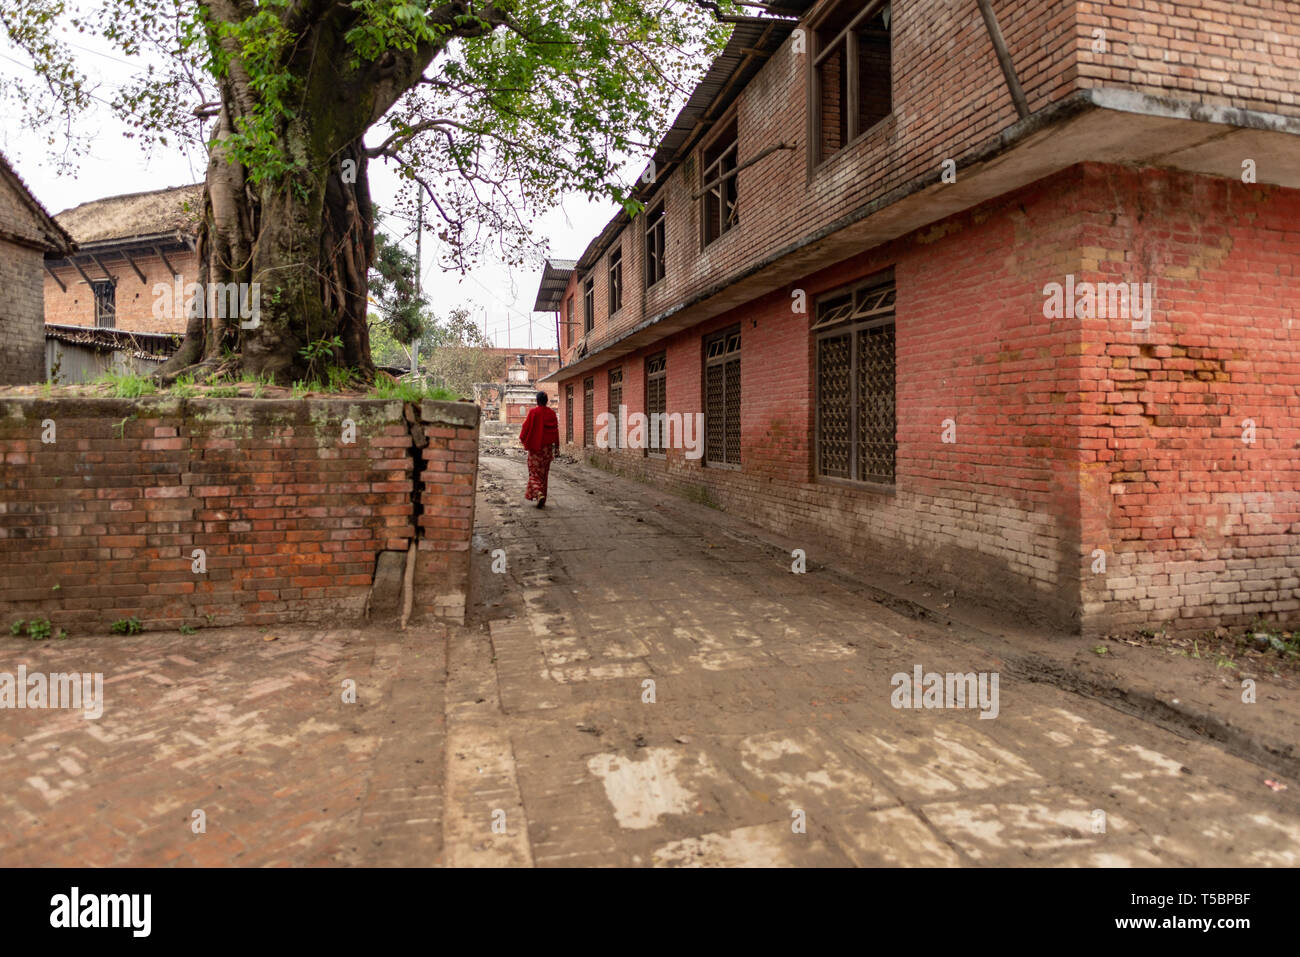 BHAKTAPUR, NEPAL - APRIL 5, 2019: Woman wearing red clothes walking nearby an industrial looking building, taken in an overcast morning in the histori Stock Photo